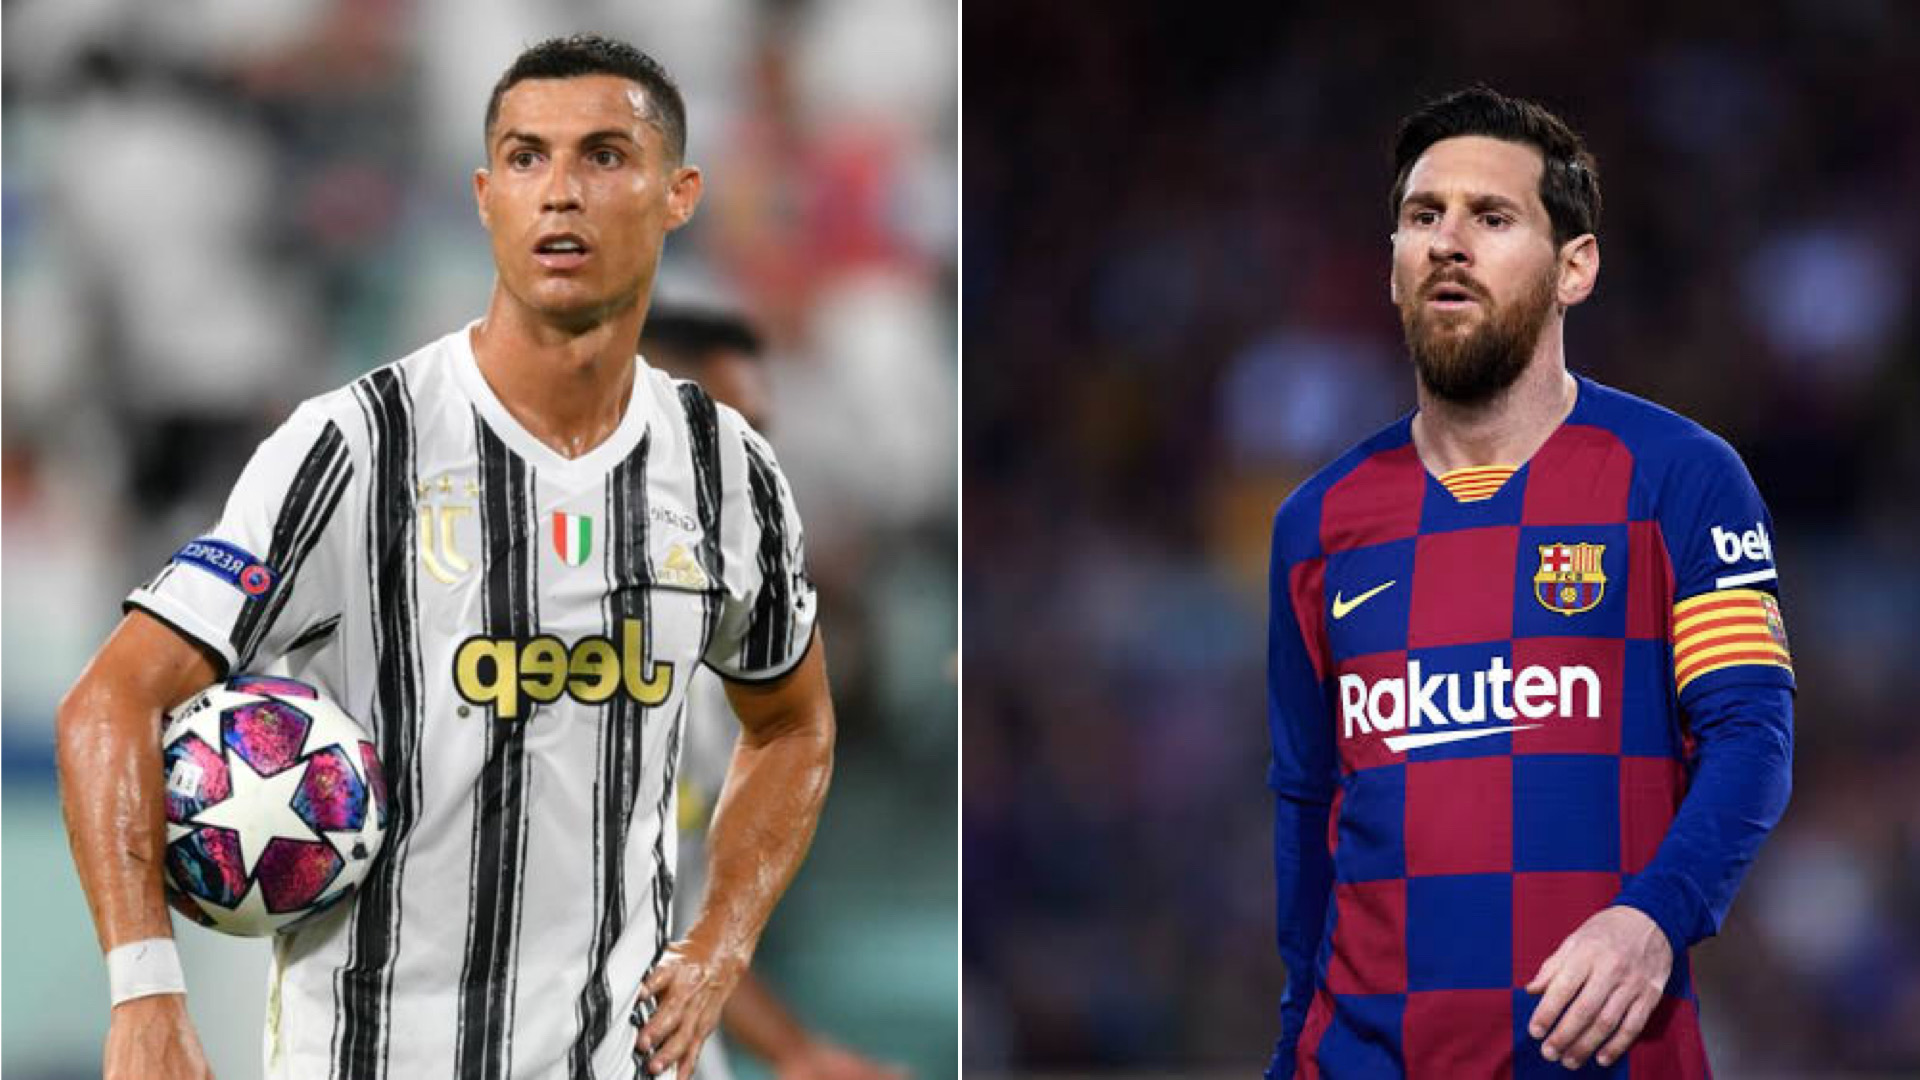 Champions League 2020/21 Draw: Lionel Messi's Barcelona To Face Cristiano Ronaldo's Juventus In Group Stage